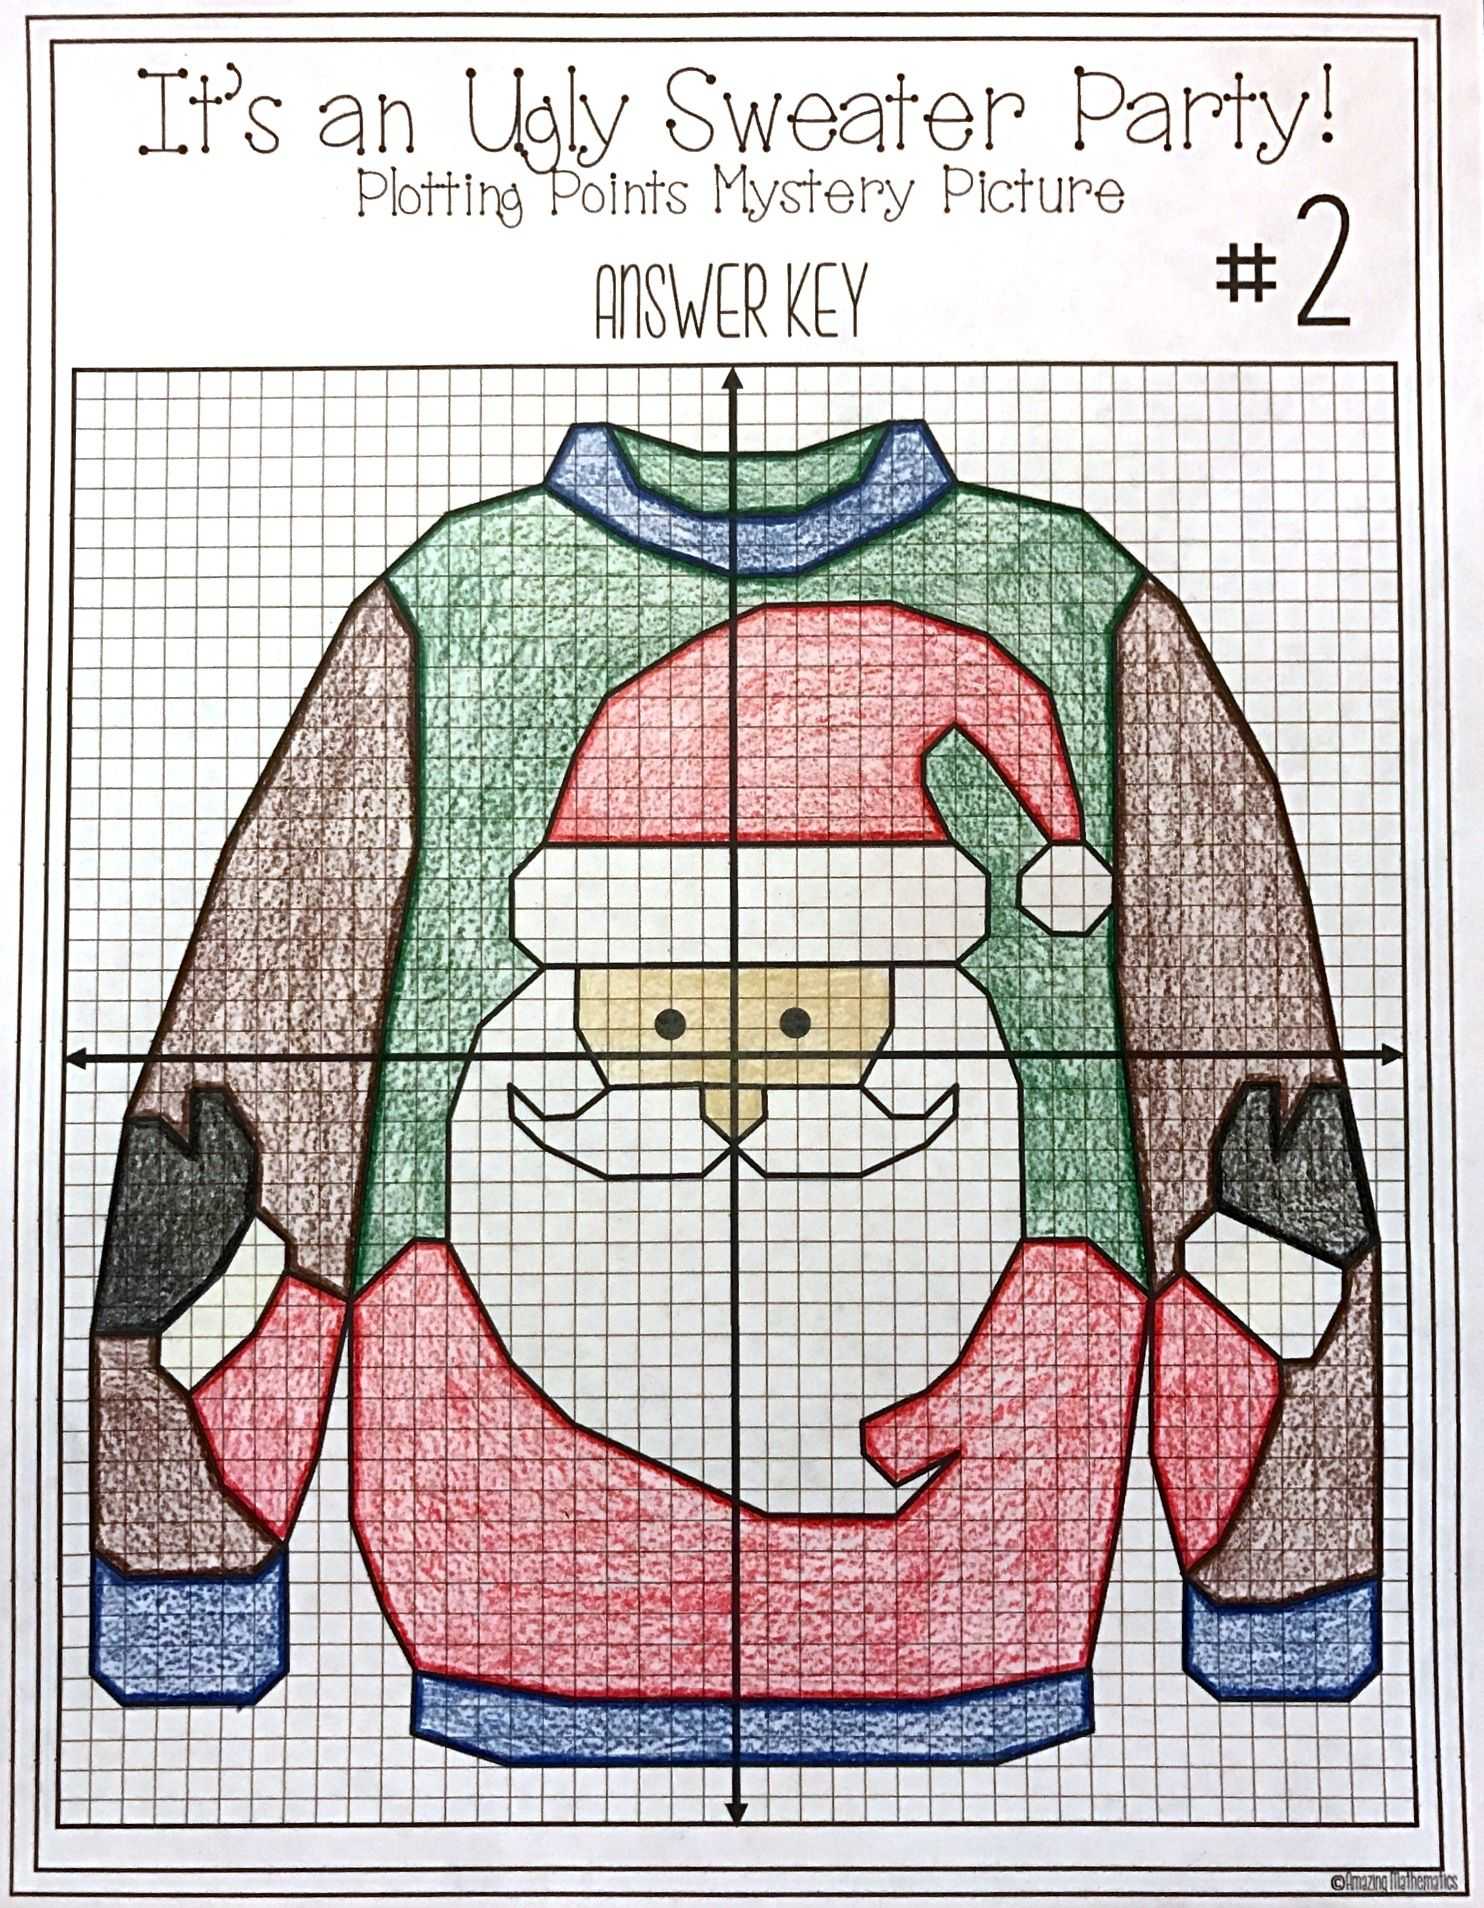 Standard Deviation Worksheet with Answers Also Christmas Math Activity Ugly Sweaters Plotting Points Mystery